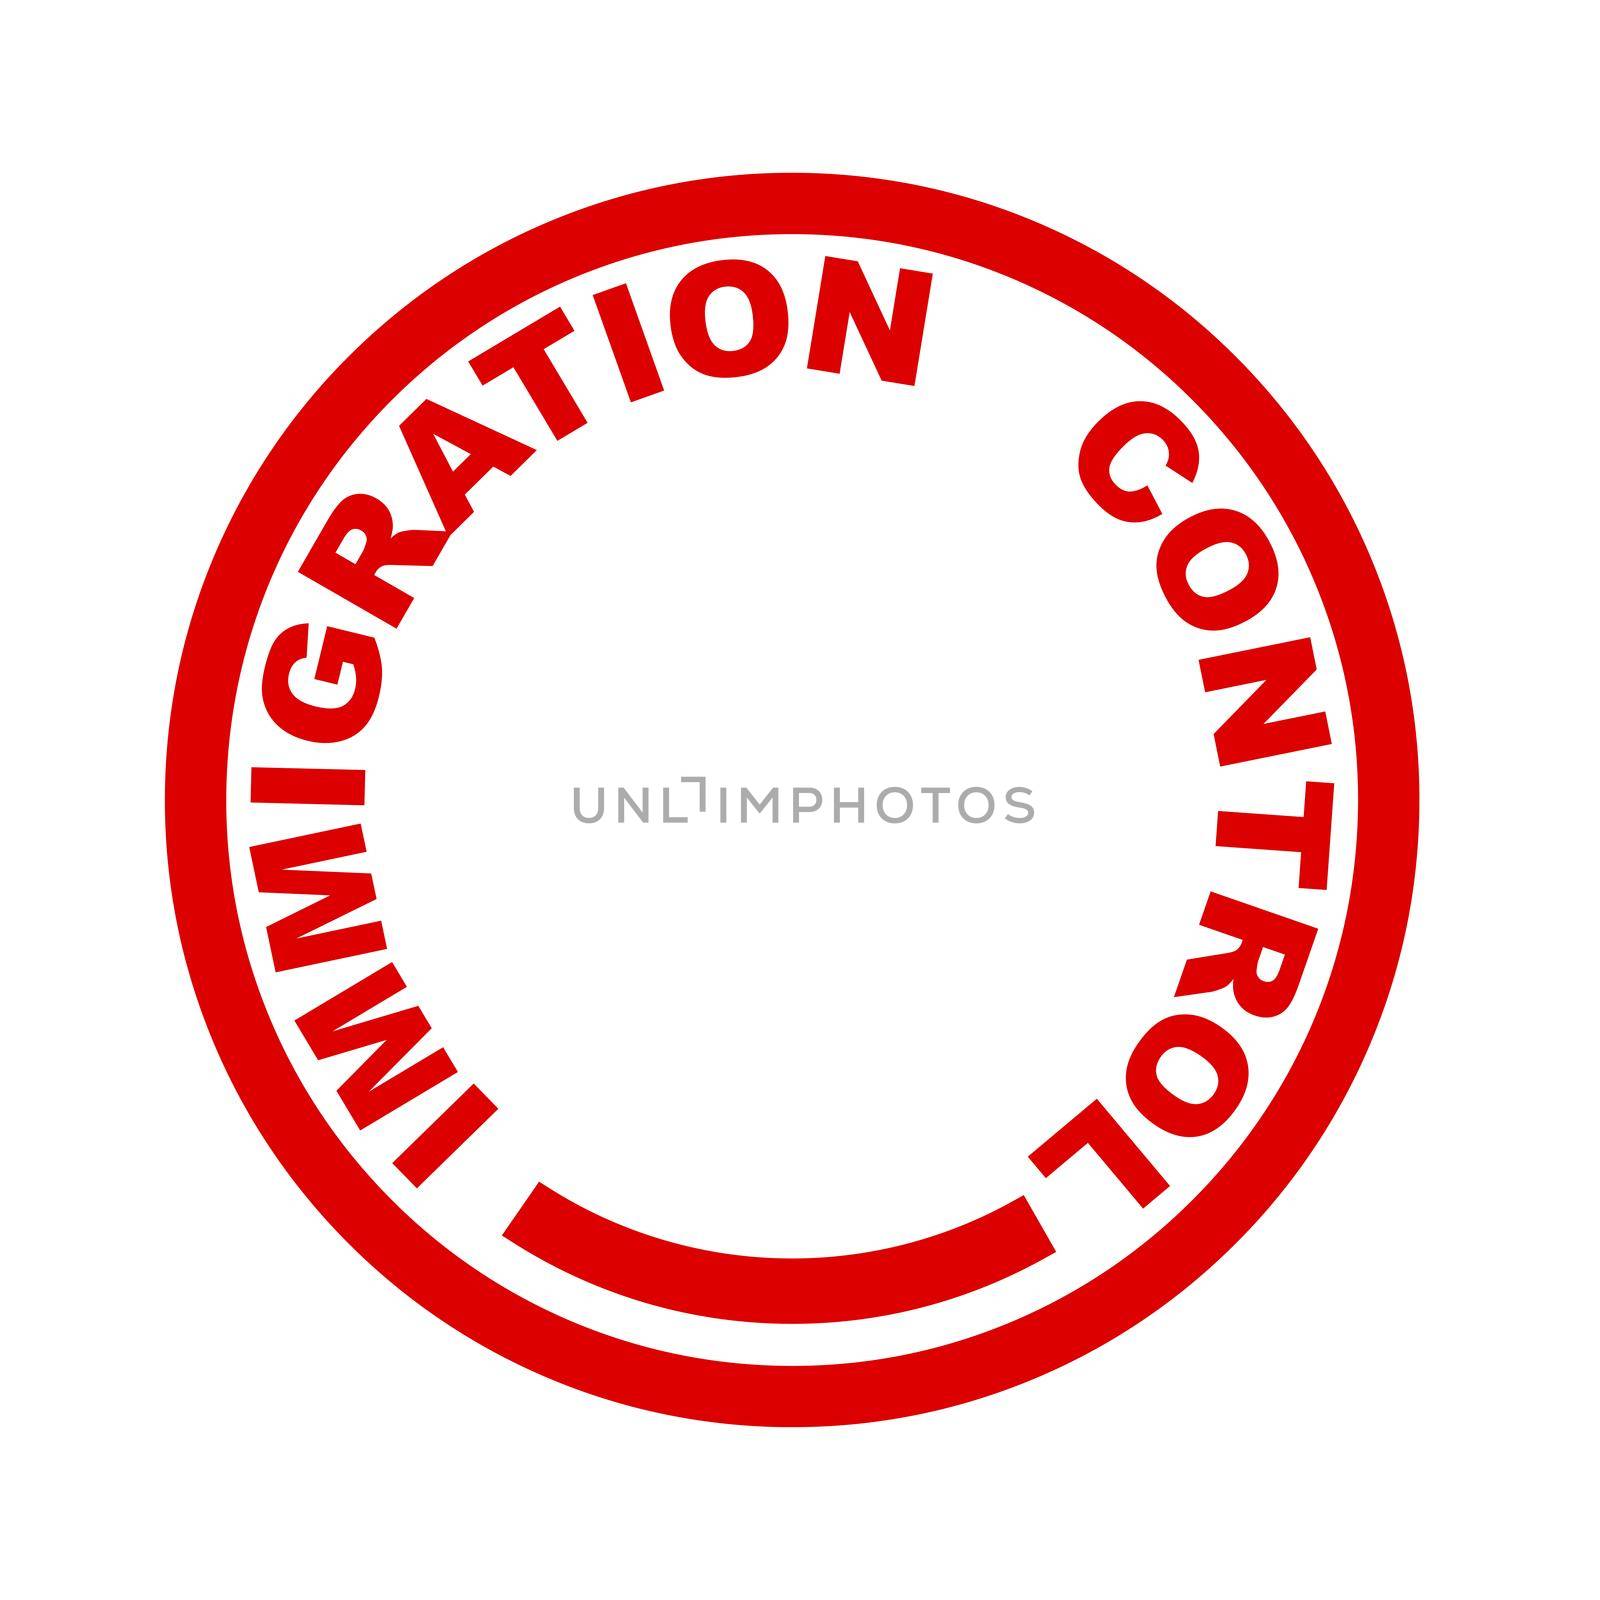 Immigration Control isolated red rubber ink stamp